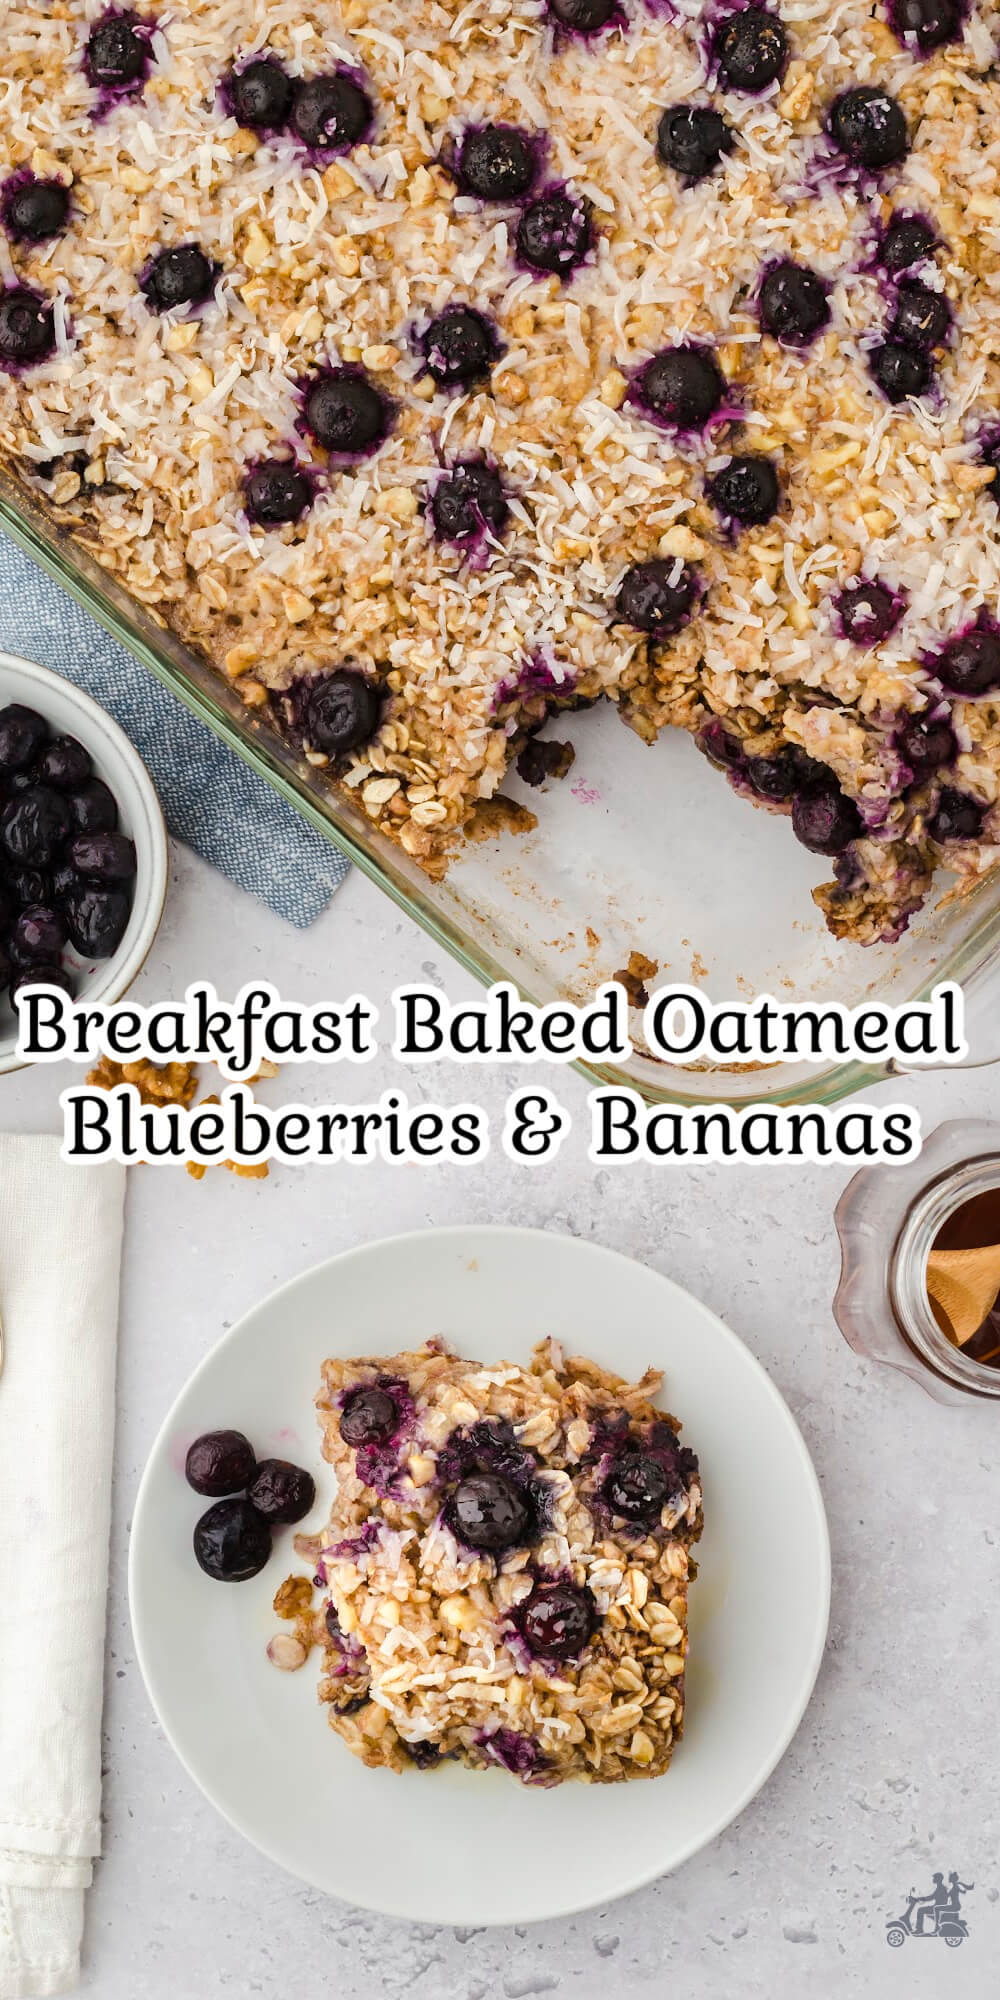 Breakfast baked Oatmeal with Blueberries and bananas almost tastes like dessert. Topped with coconut for a nice crunch plus a dollop of whipped cream. Special enough for a brunch or special occasion. How about Mother's Day. #bakedoatmeal, #oatmeal, #breakfastoatmeal, #oatmealfruit, #blueberry, #banana, #oatmealsquares, #oatmeal, #allourway